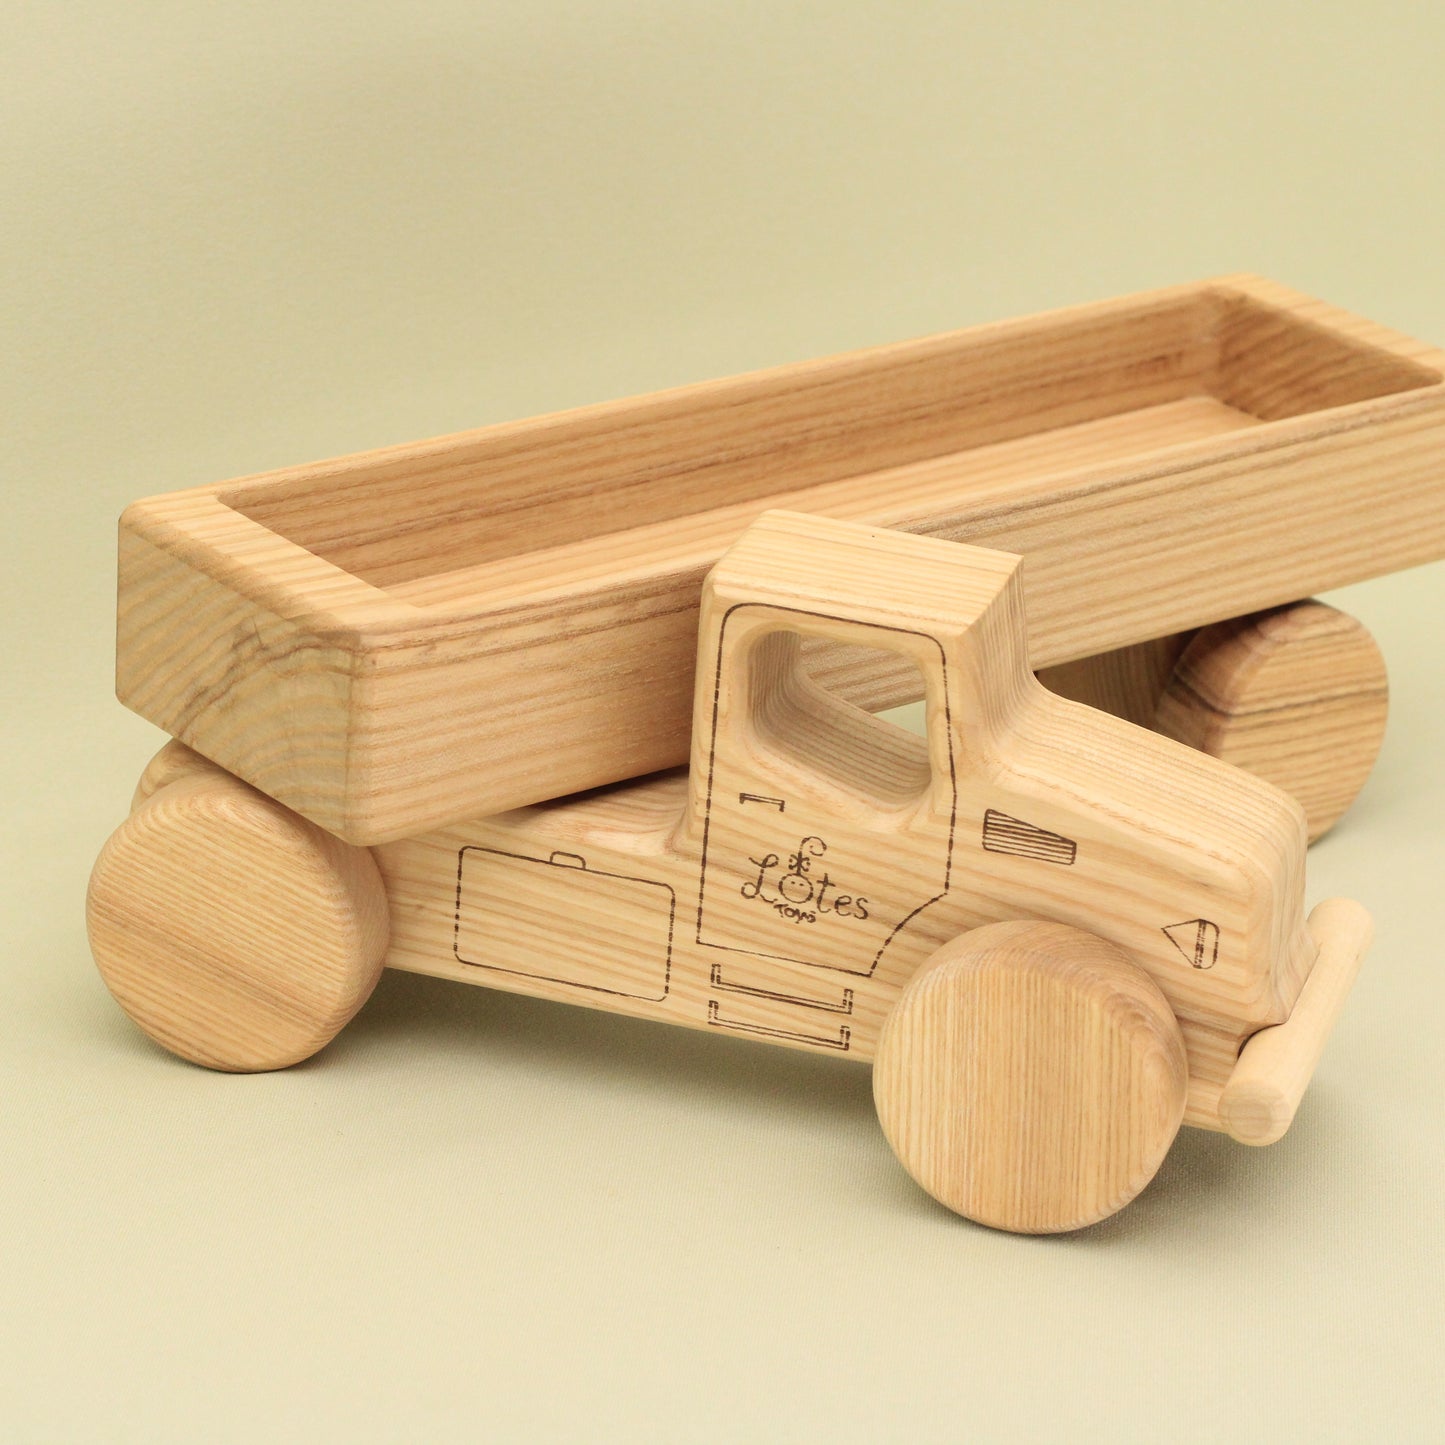 Lotes Toys Wooden Construction Vehicles Car BT54